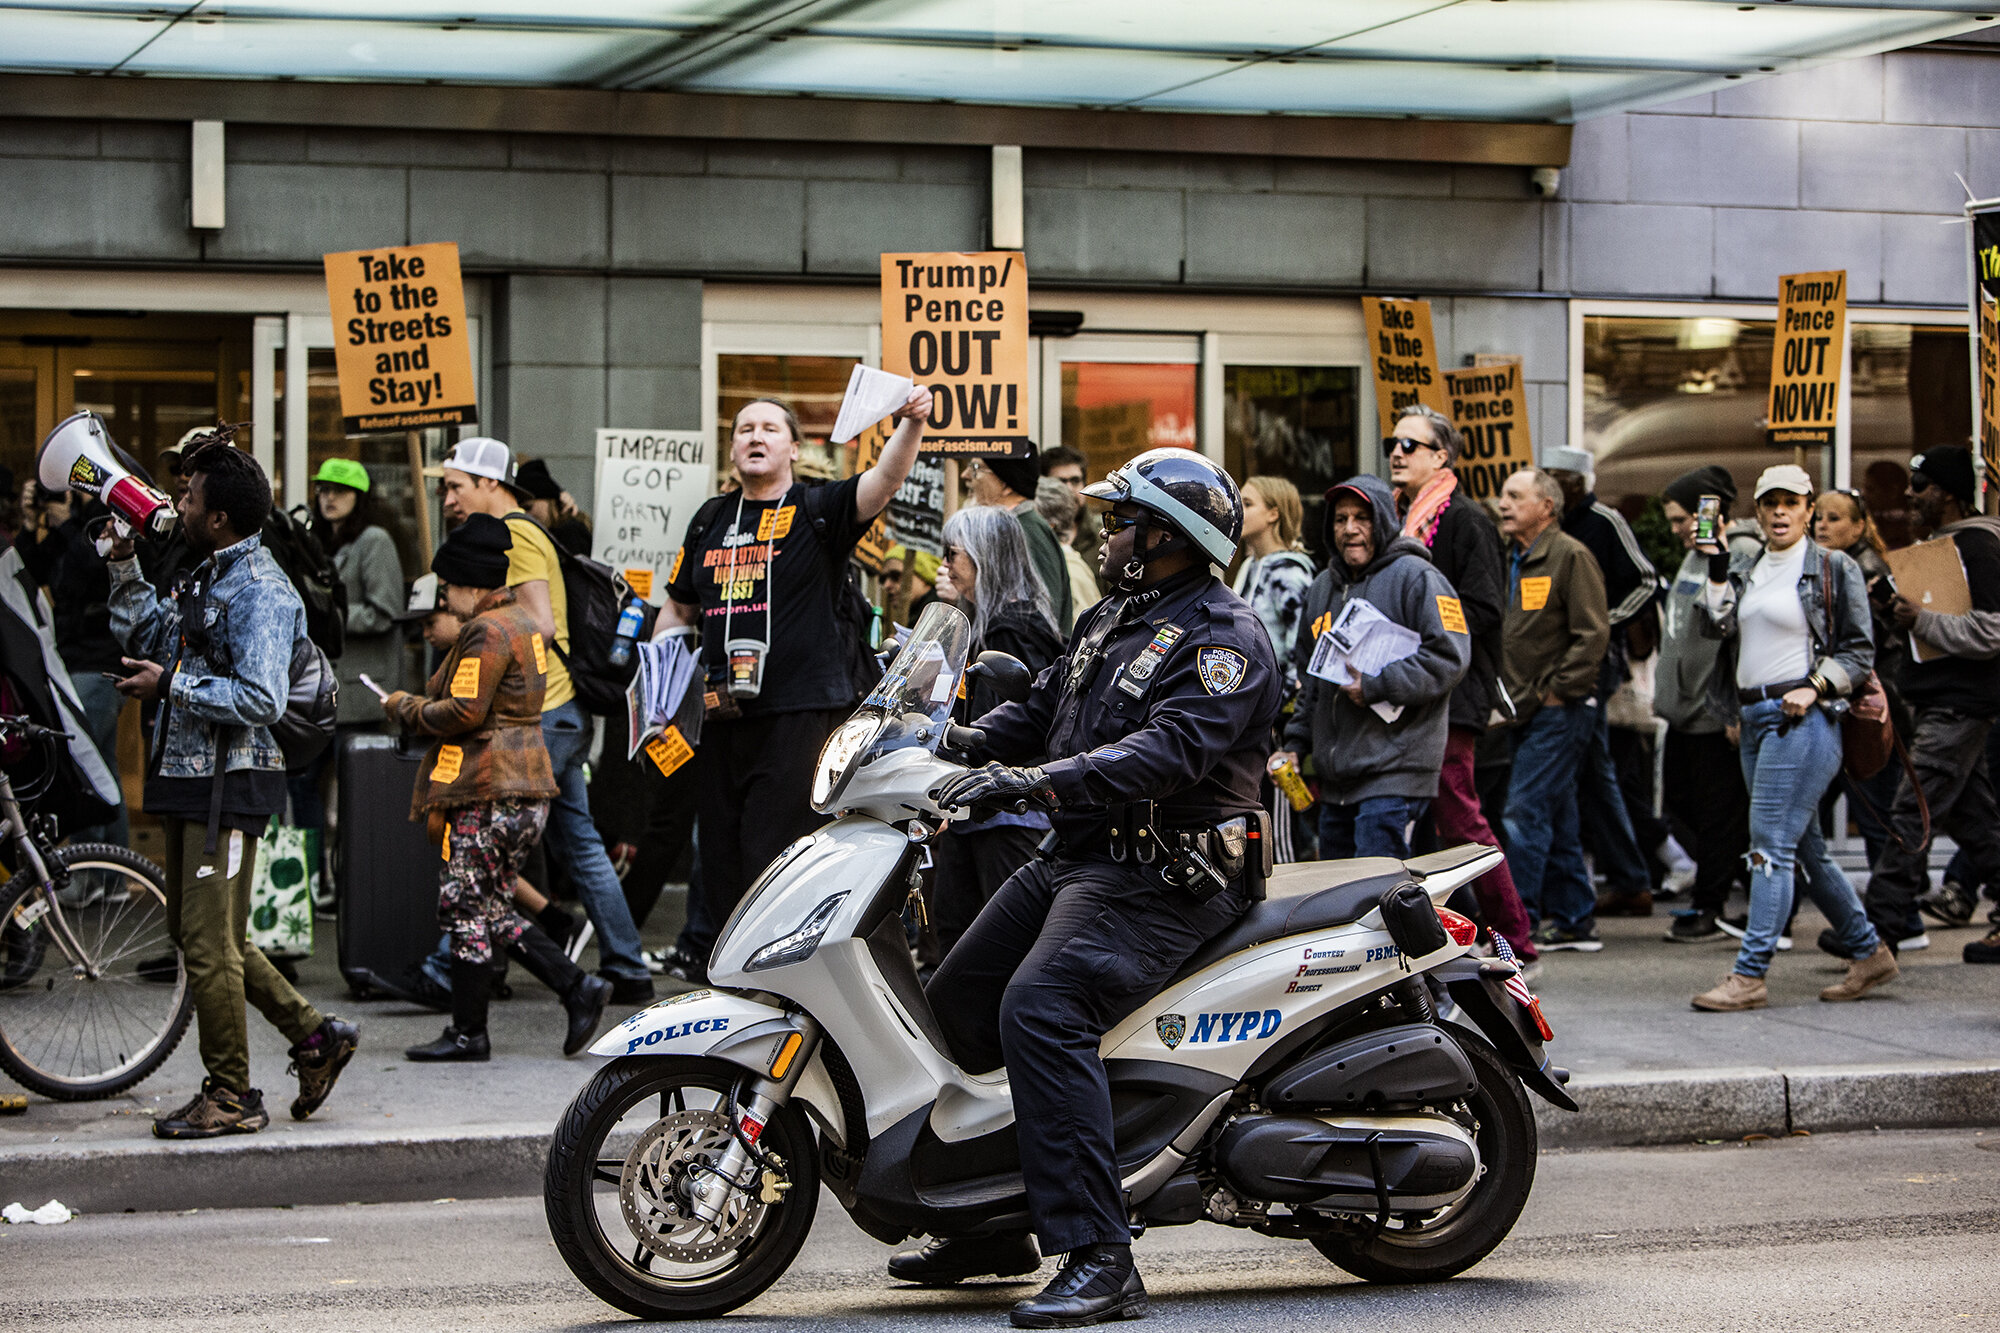 OUTNOW_Protest_2019_NYC-0779.jpg